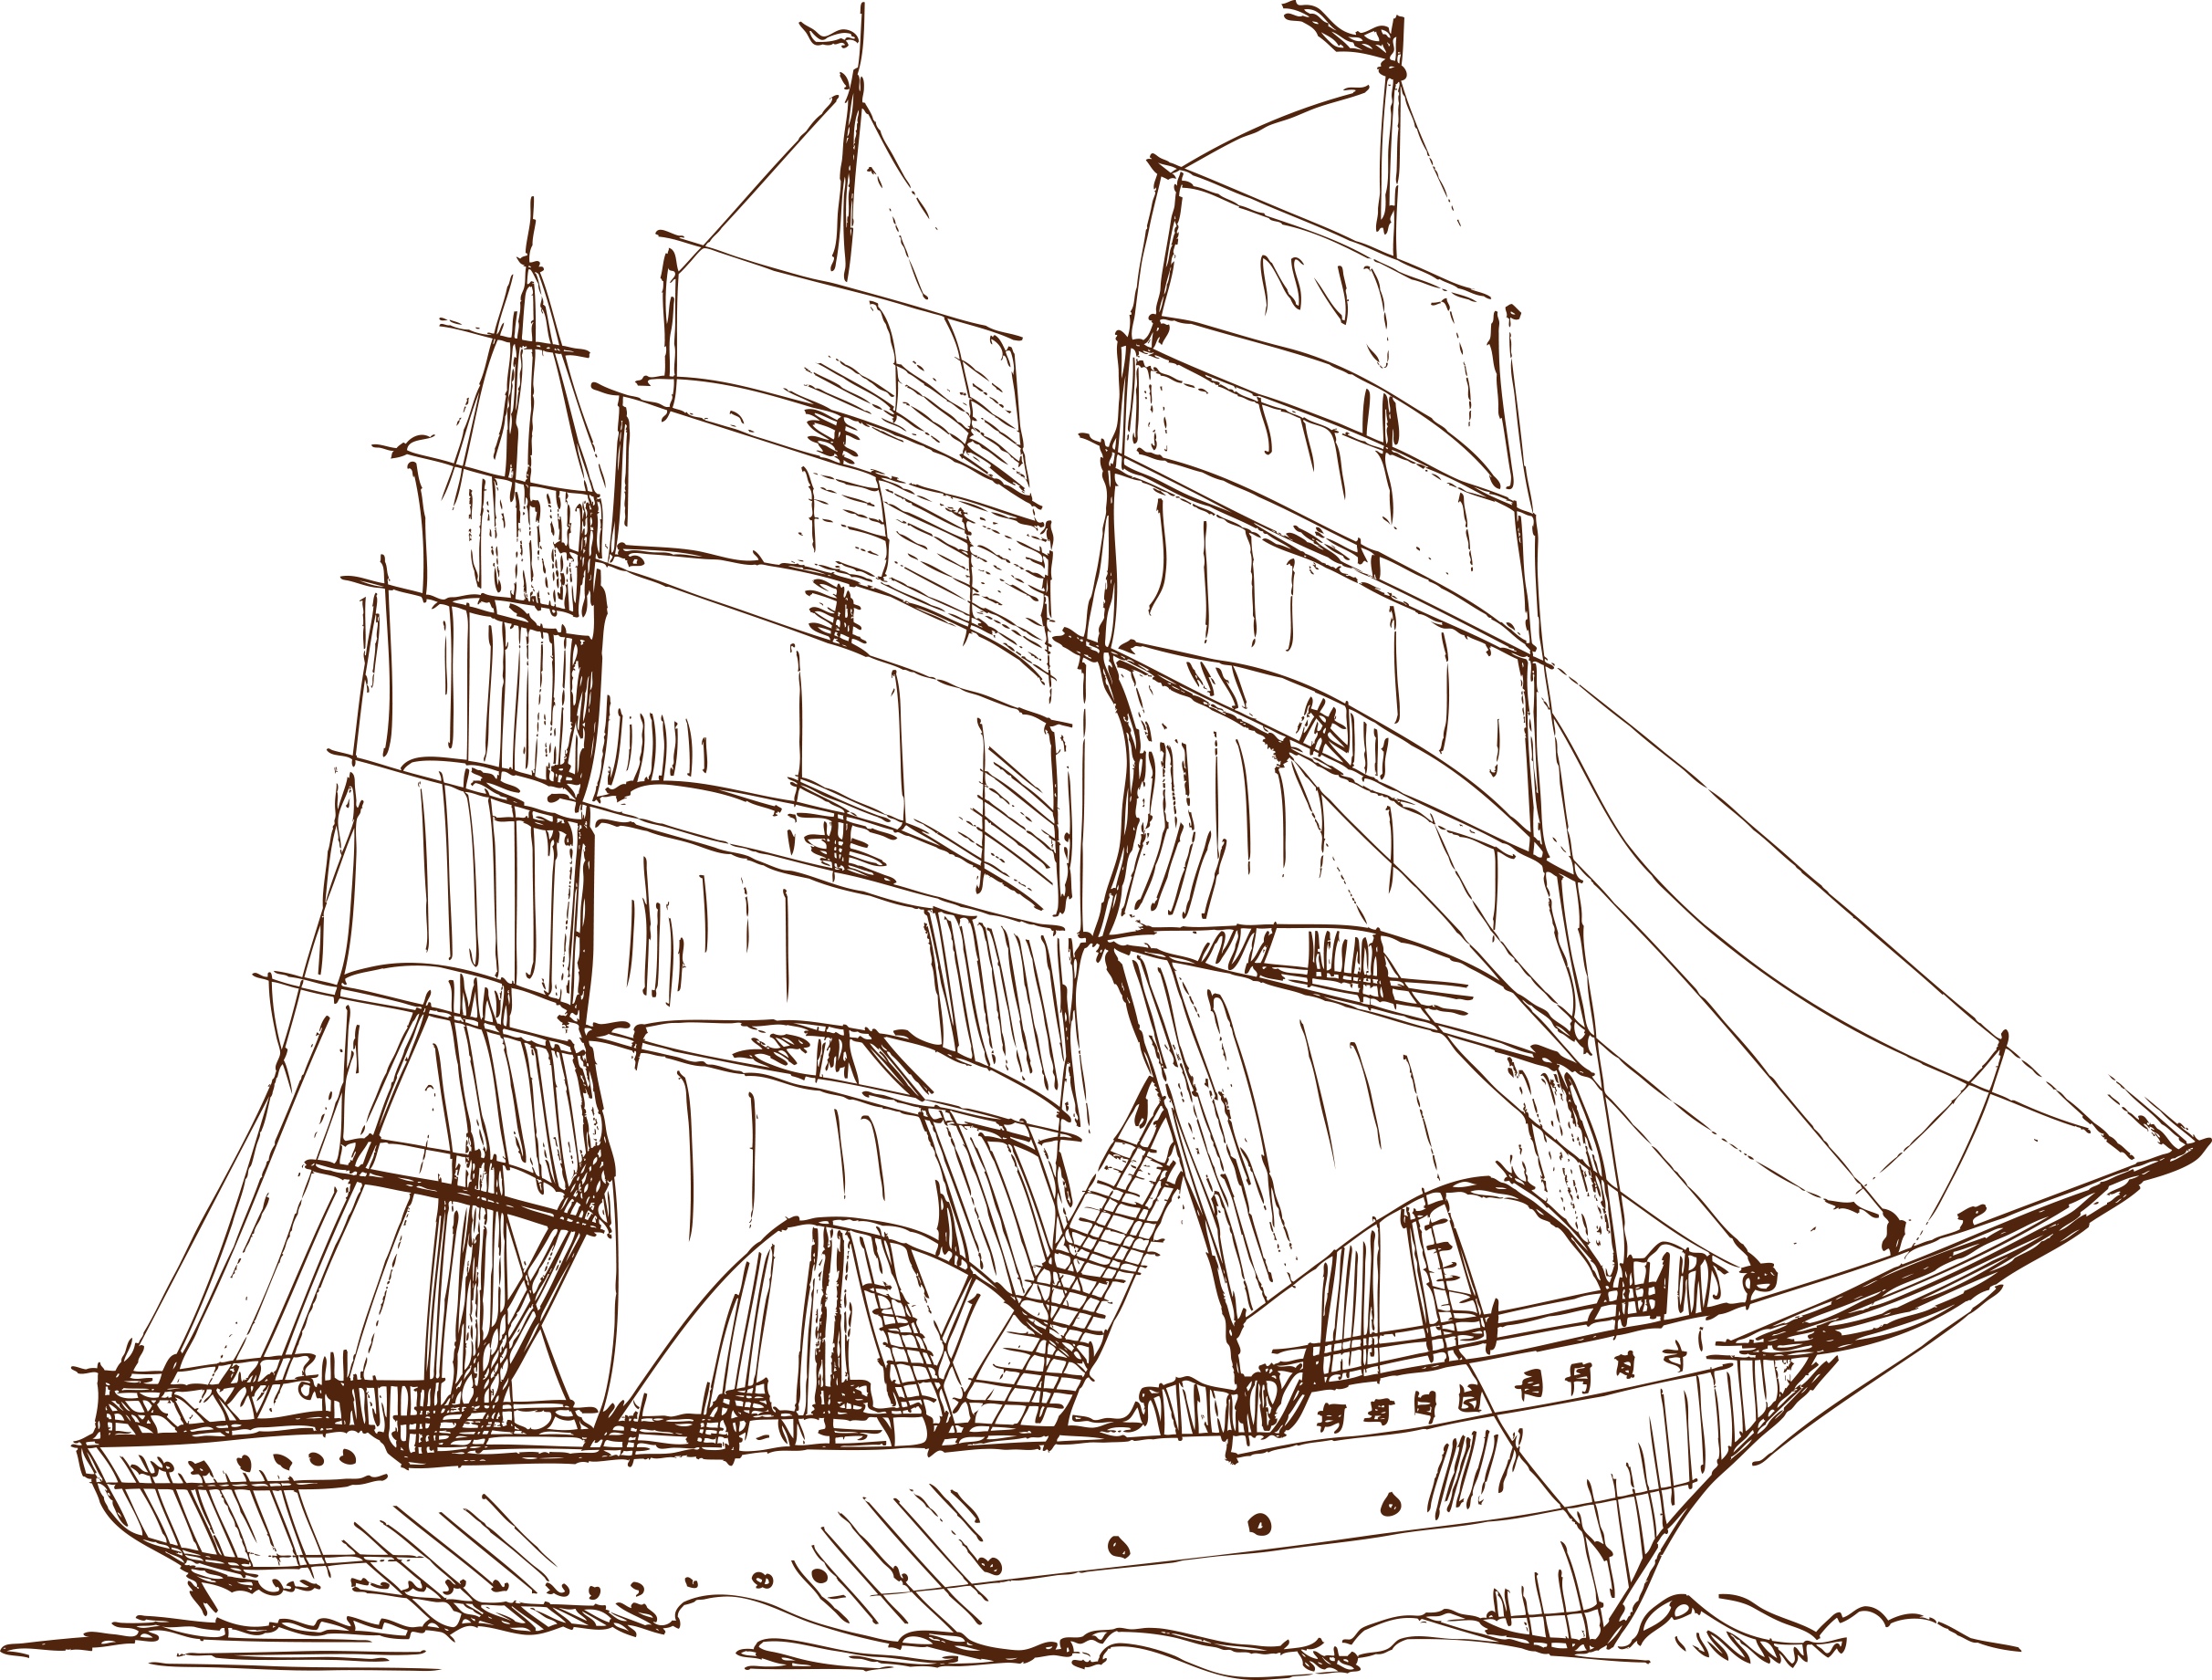 Drawing of an old ship